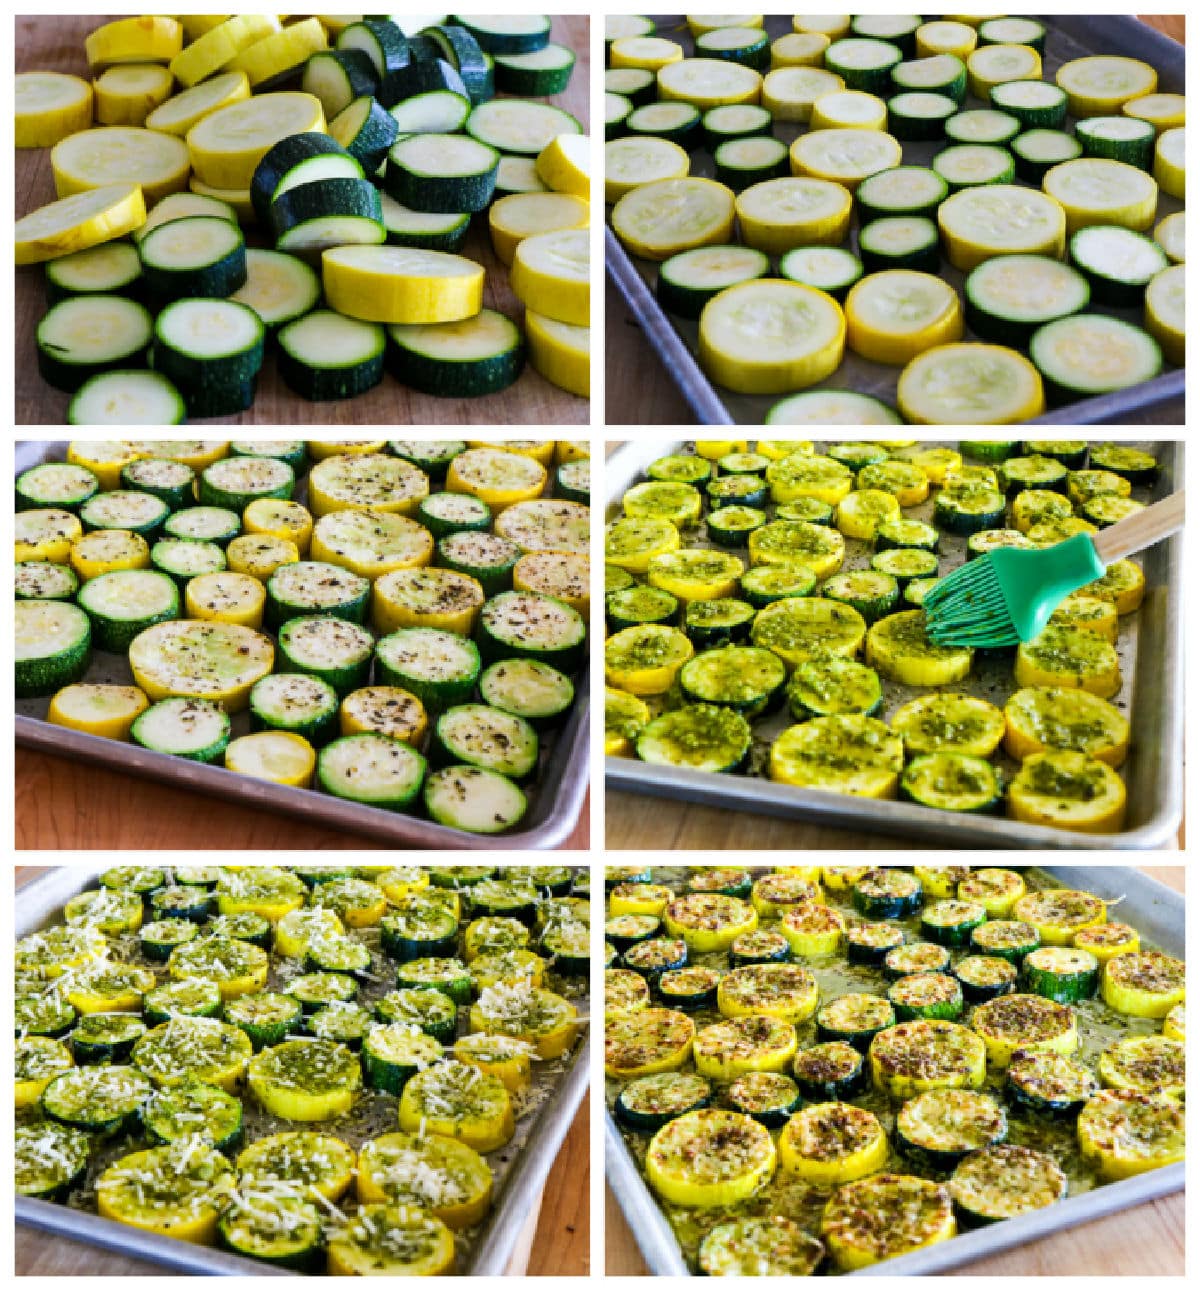 Collective action shots of summer squash with pesto and parmesan